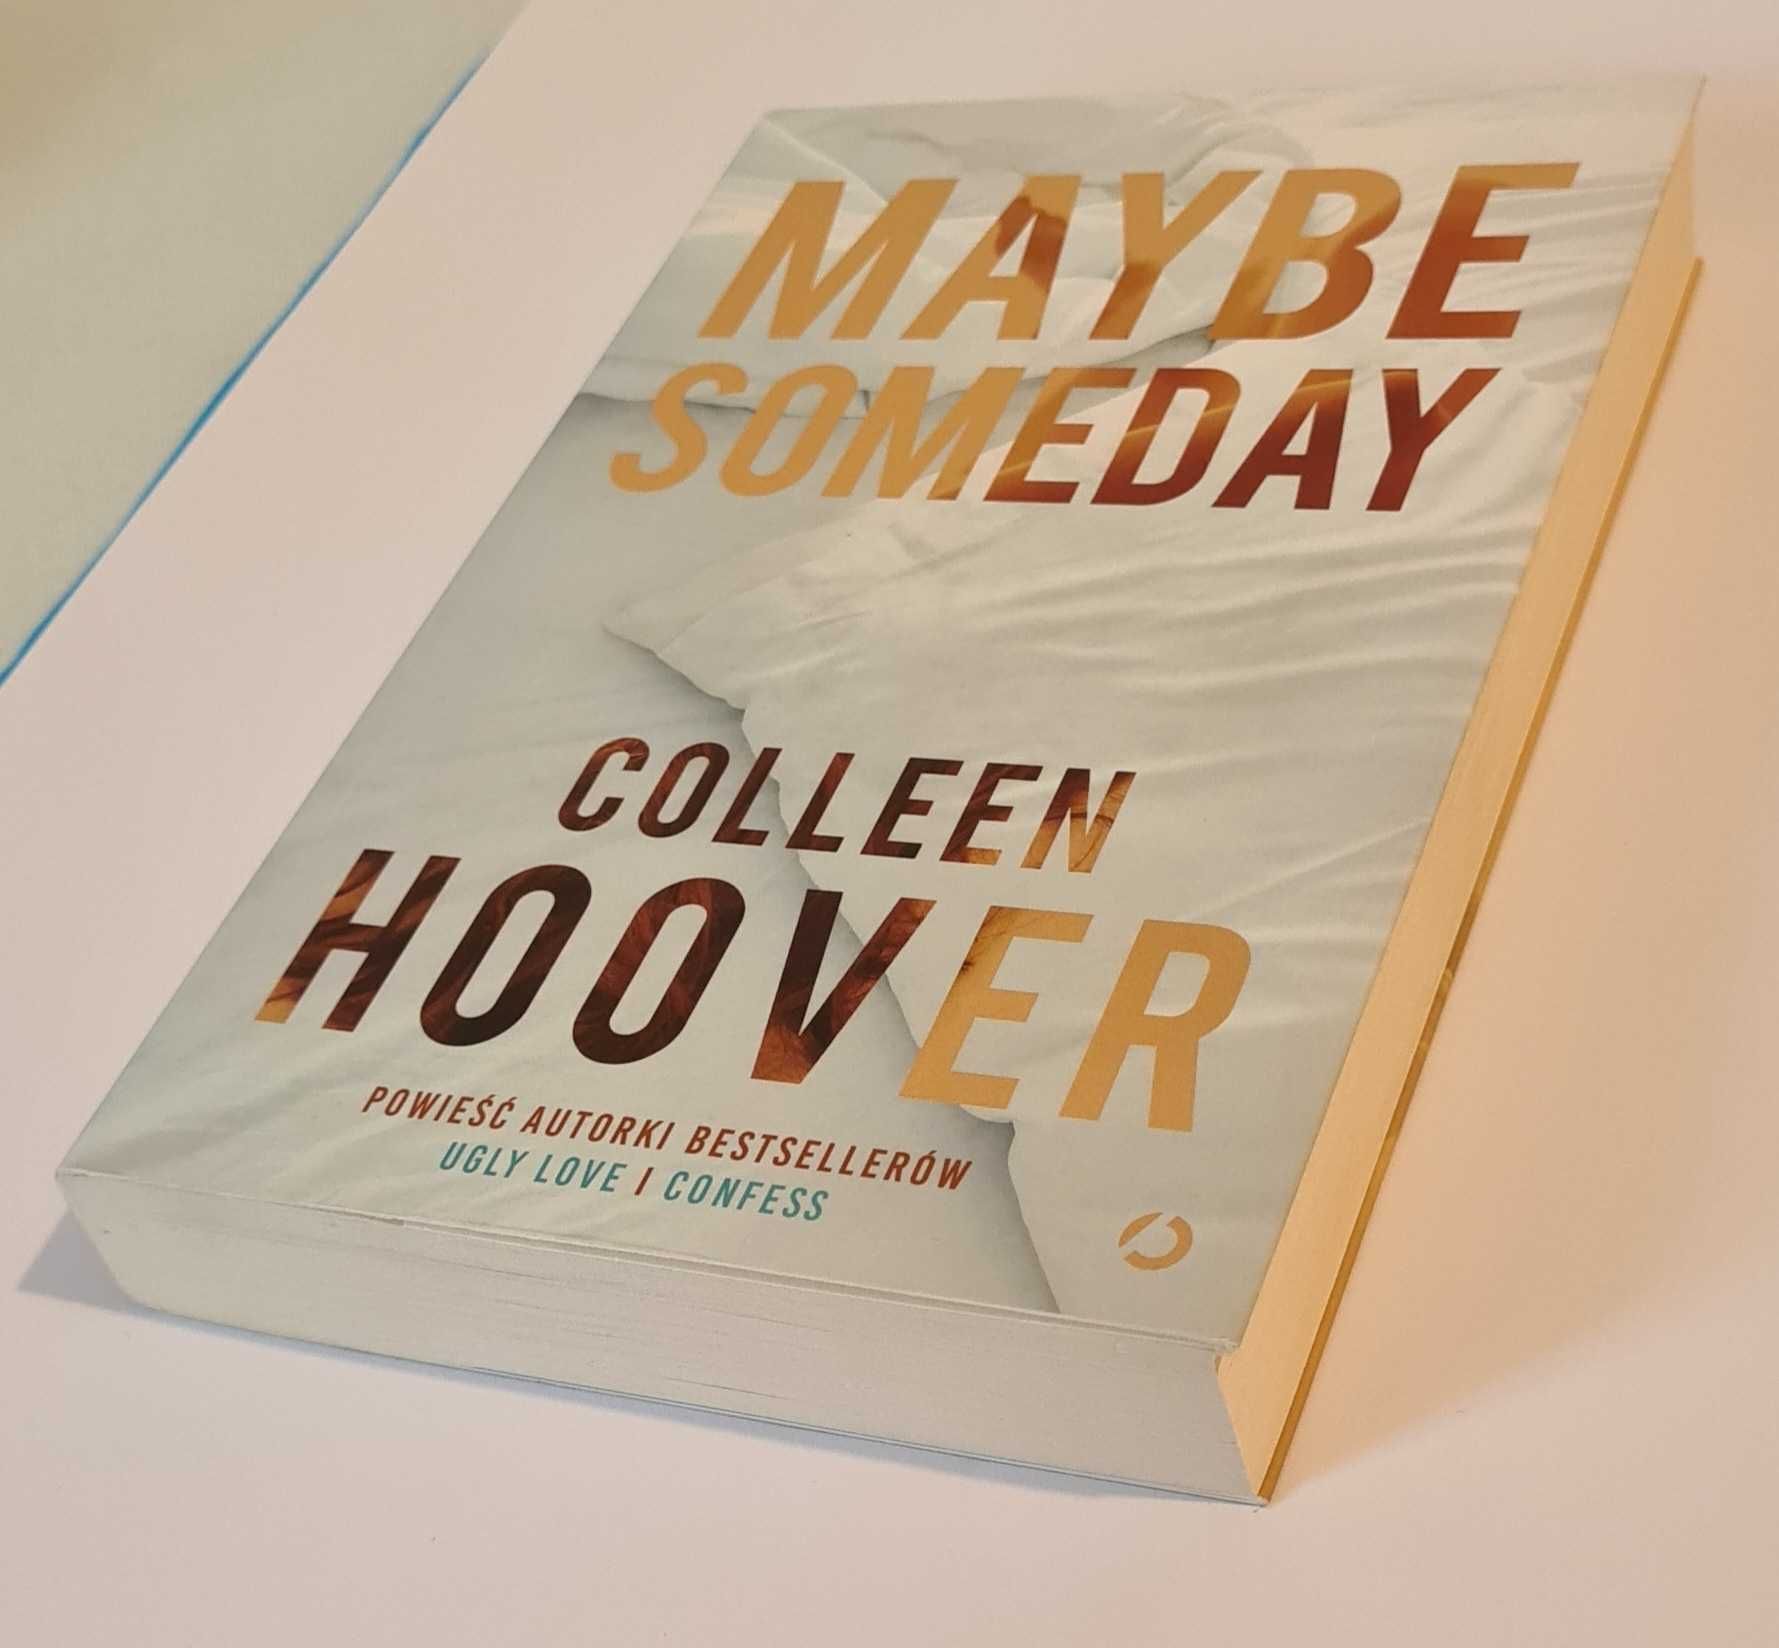 ,,Maybe someday" Colleen Hoover